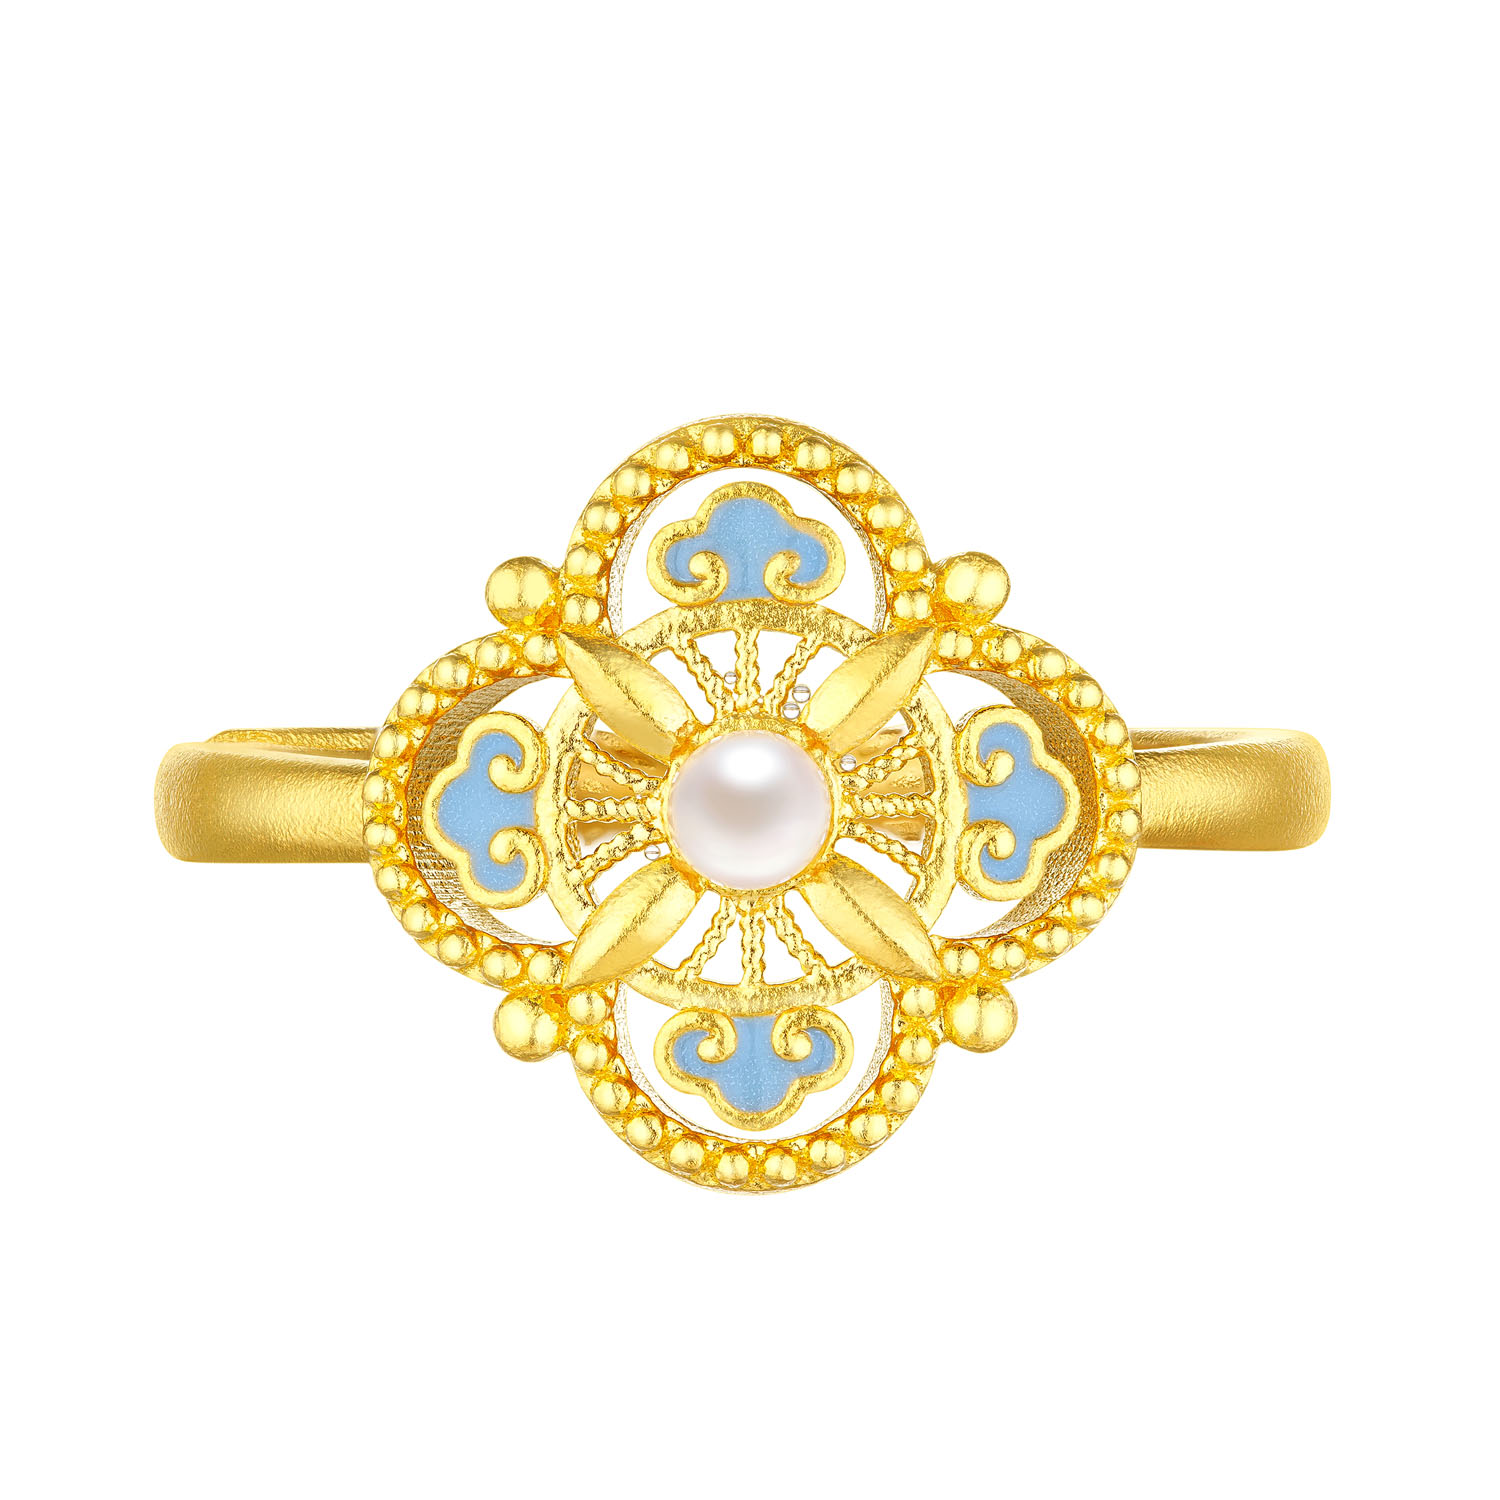 Heirloom Fortune - Charm of Song Dynasty Collection "Auspicious Song Style" Gold Pearl Ring